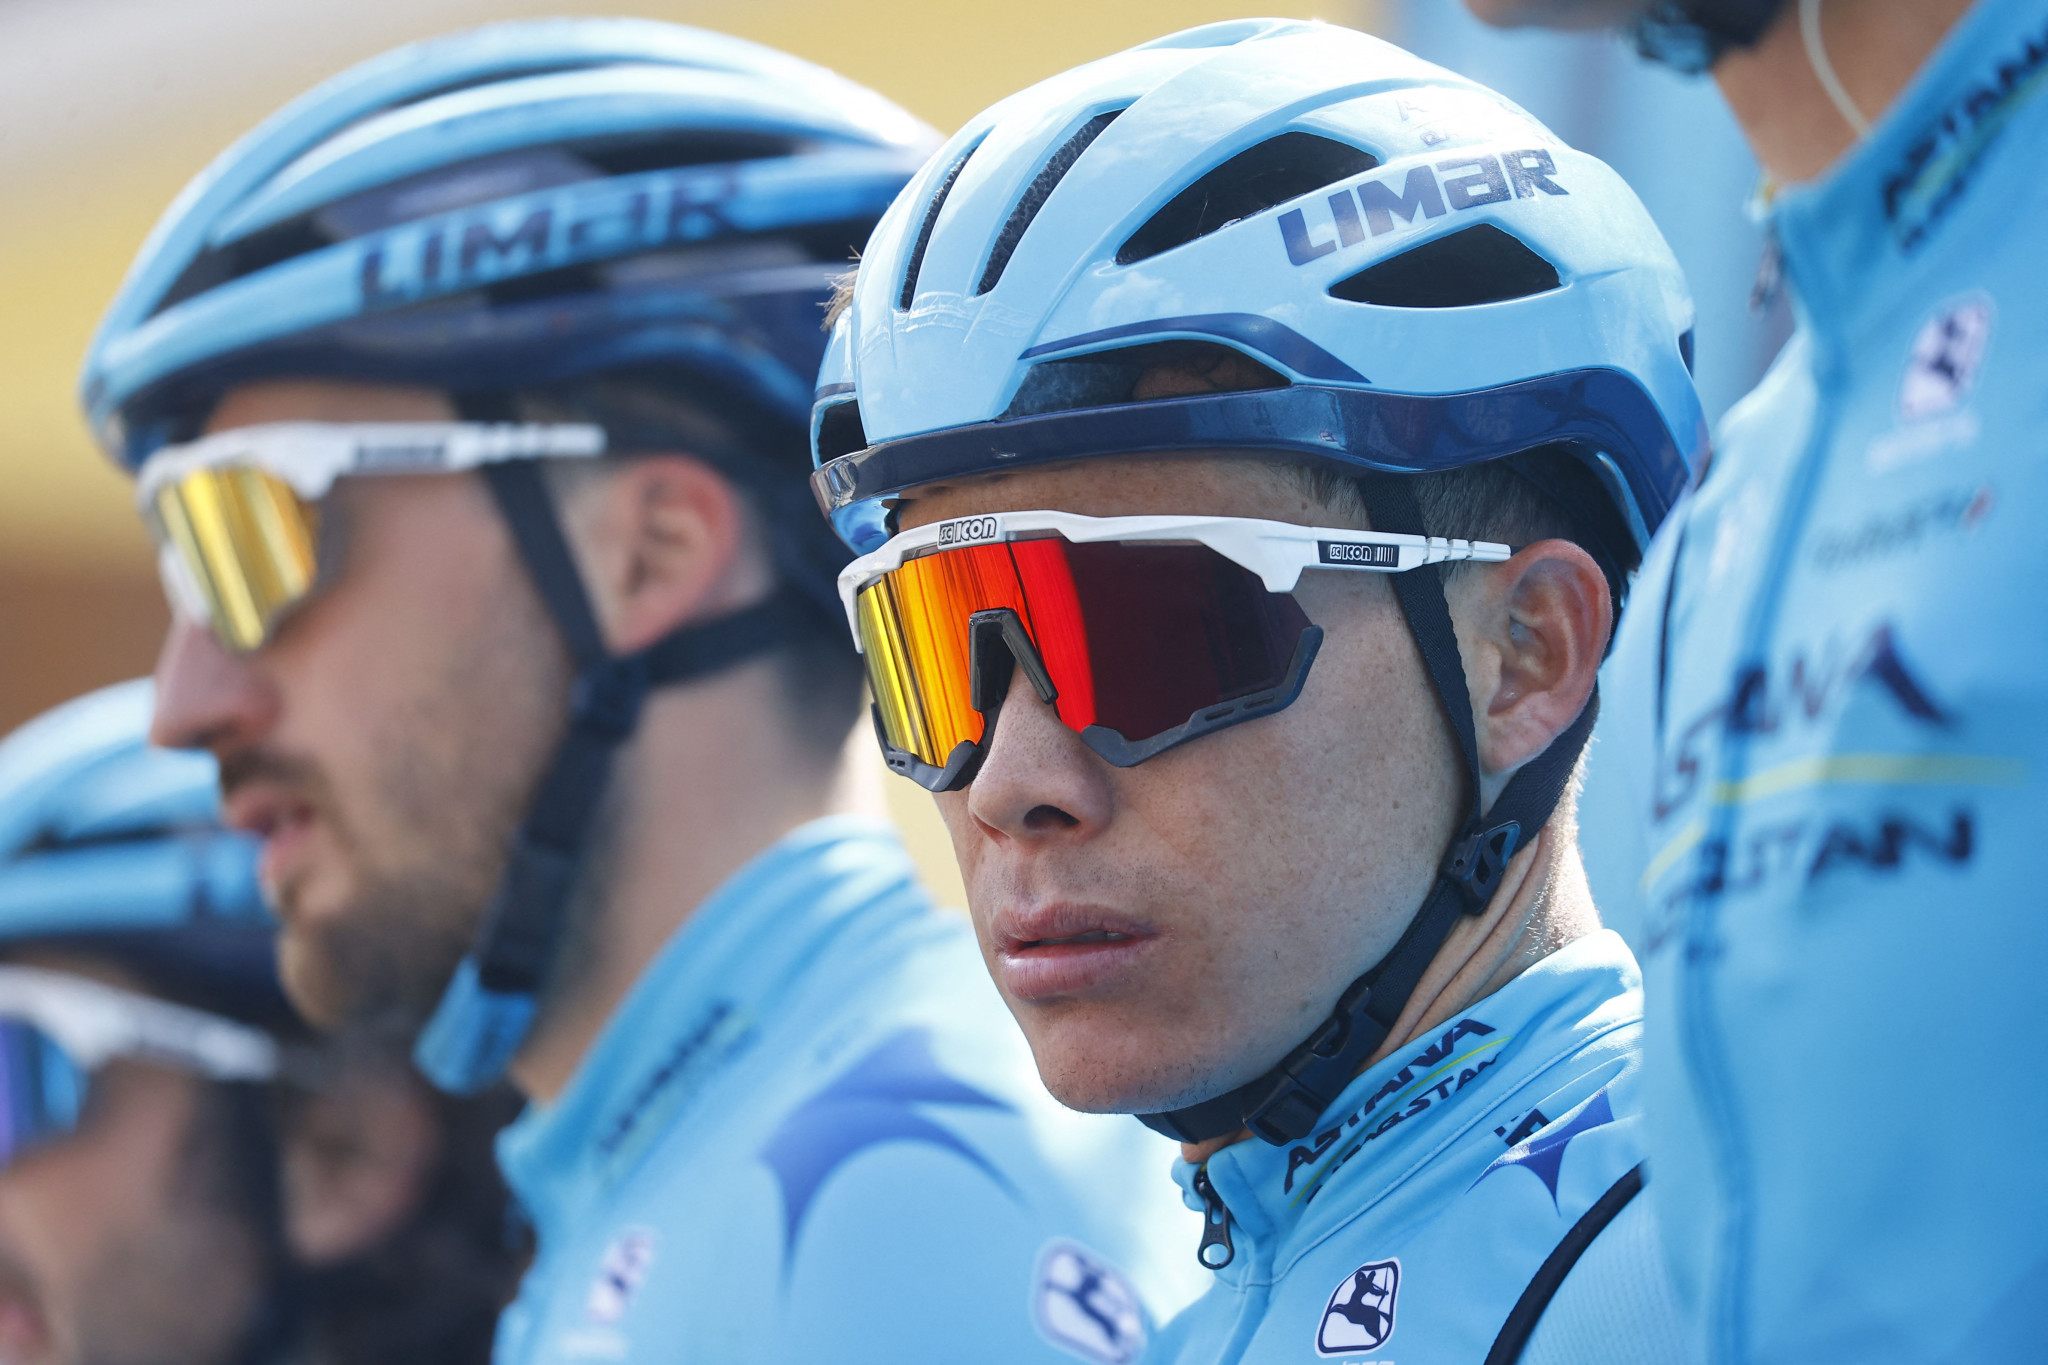 Cyclist López suspended by Astana team following links to drug trafficking